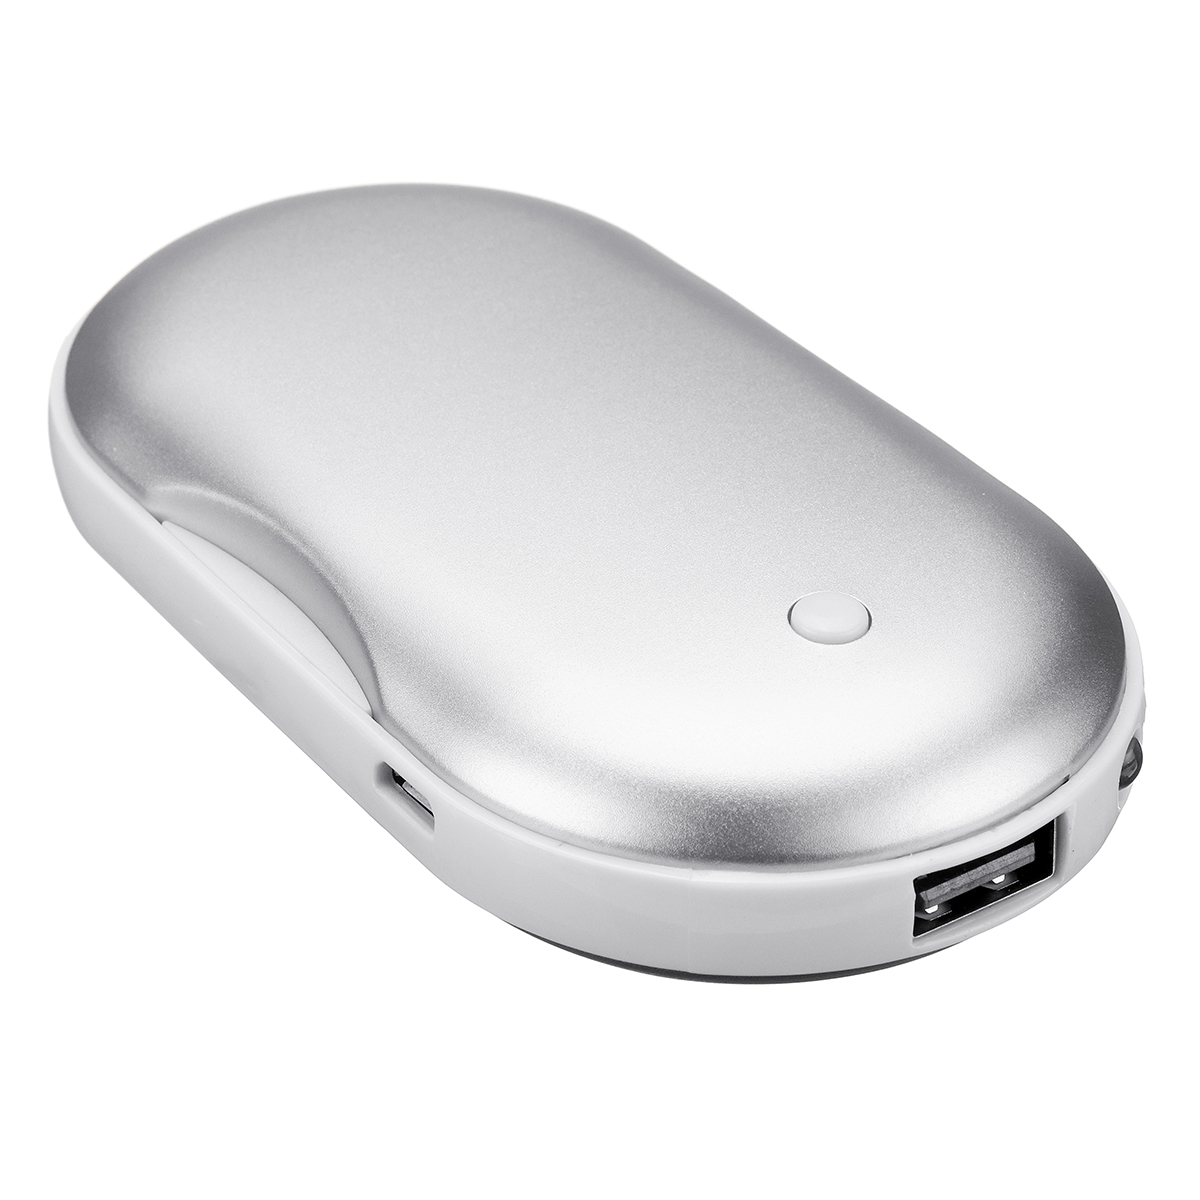 5200mAh-4-In-1-Macarons-Pocket-Hand-Warmer-Heater-Rechargeable-LED-USB-Electric-Mobile-Power-Bank-PT-1413727